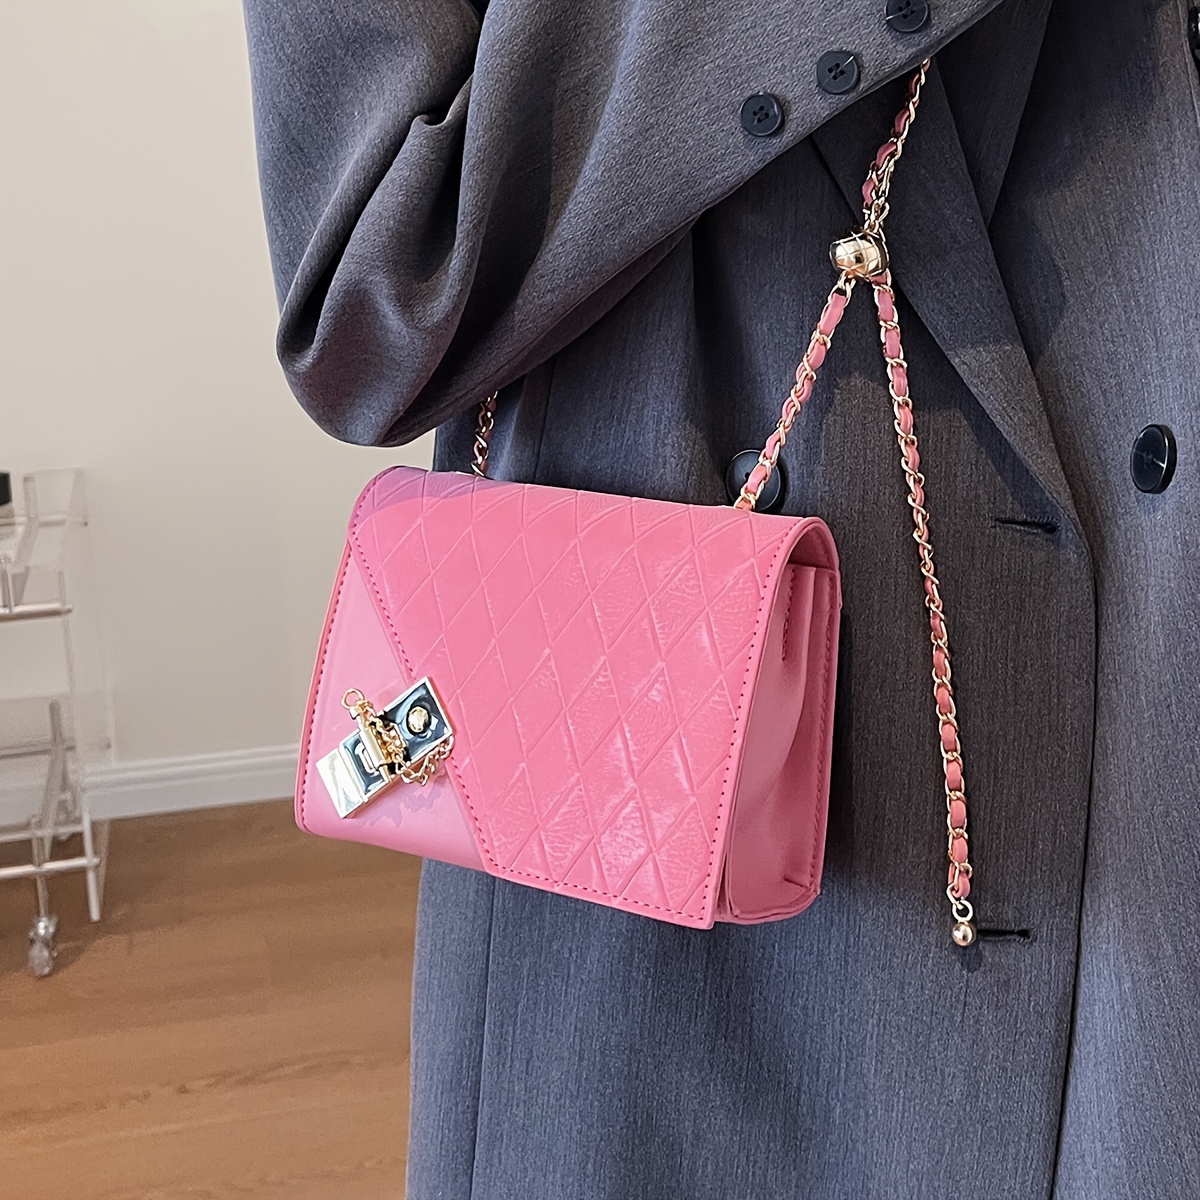 Pink Shoulder Bag With Flap Pocket Twist Lock Fashionable For Daily PU